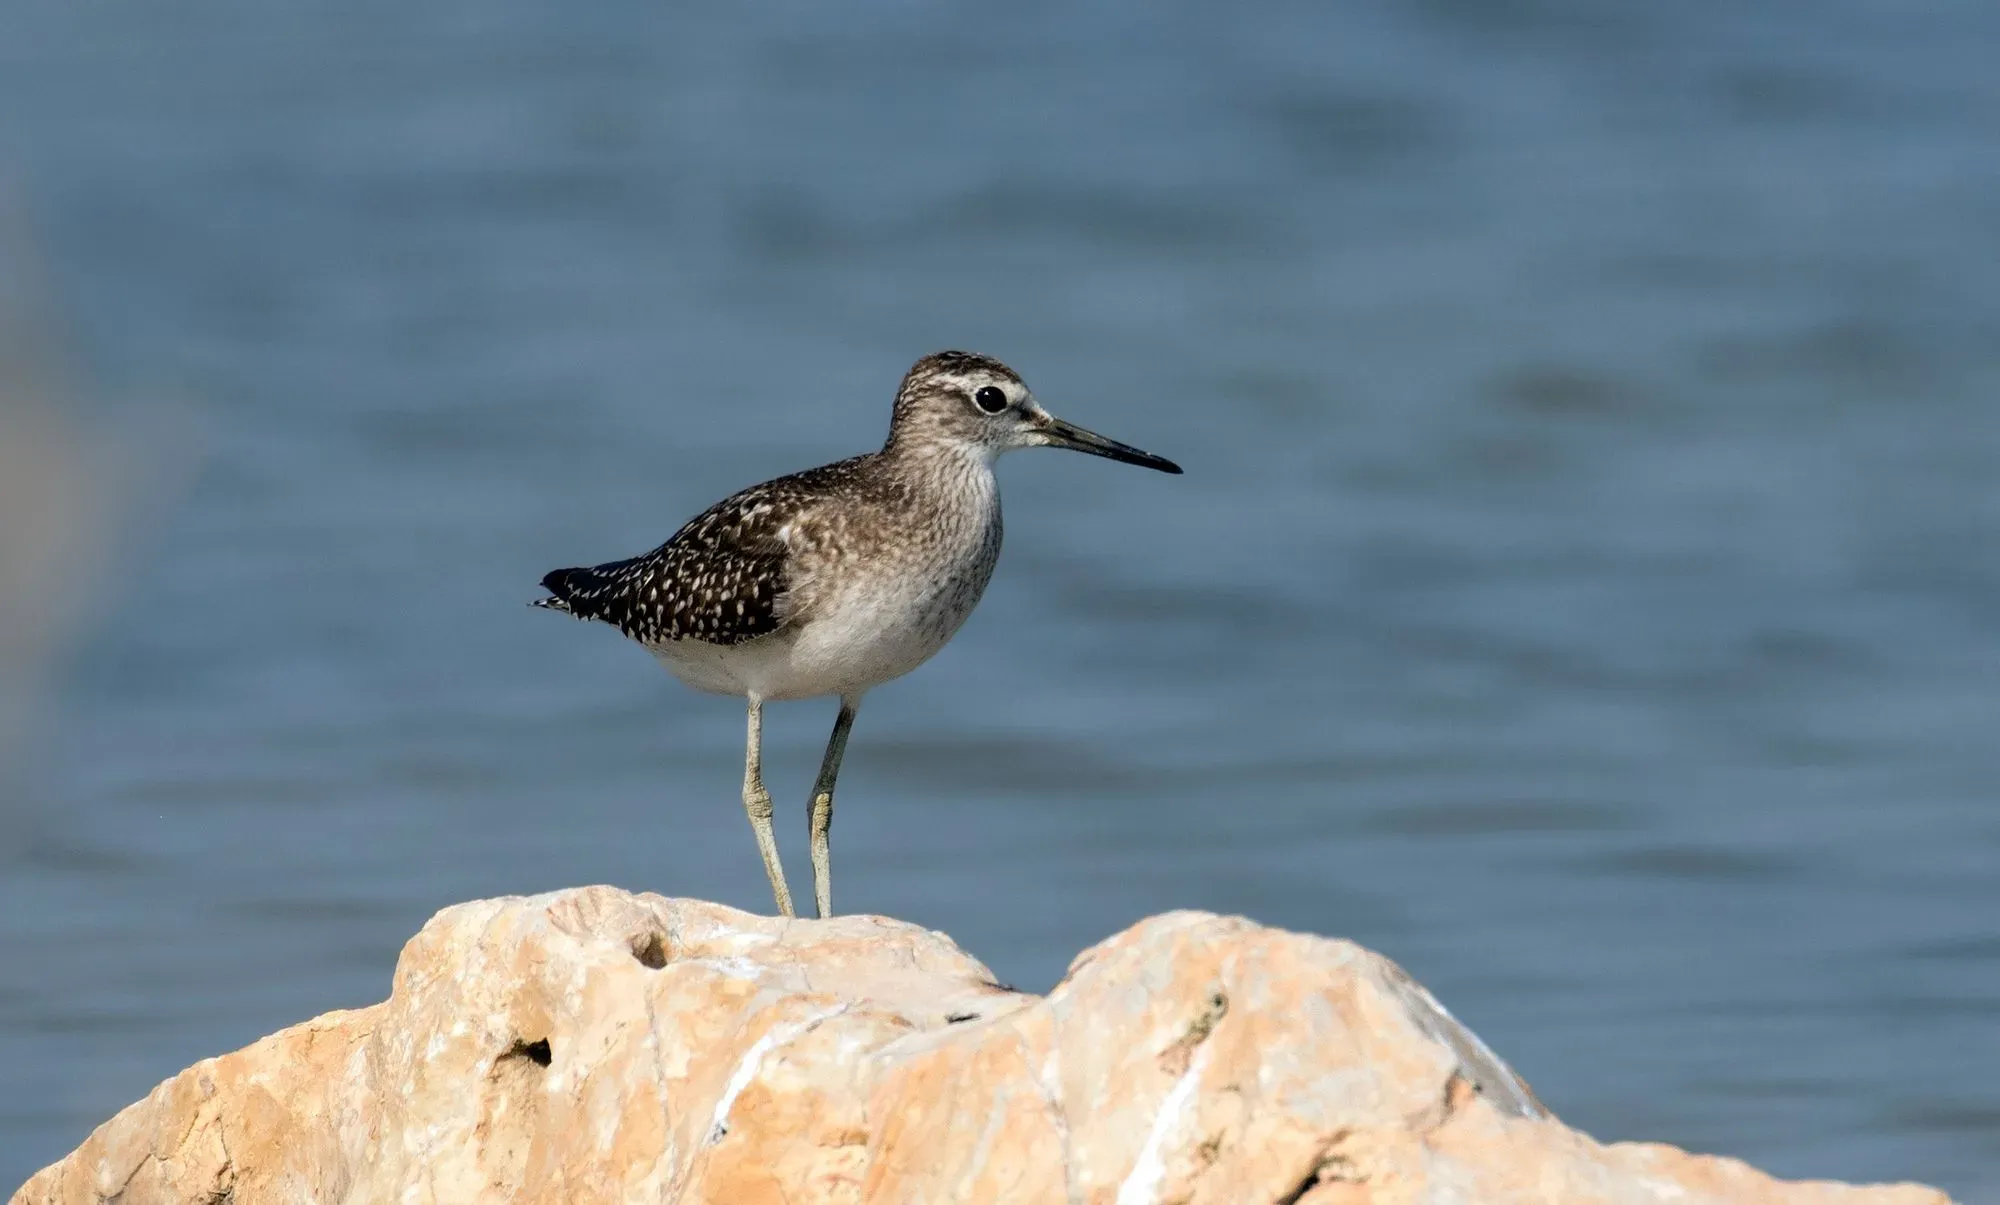 Sandpipers are not found in Antarctica or the dry deserts.